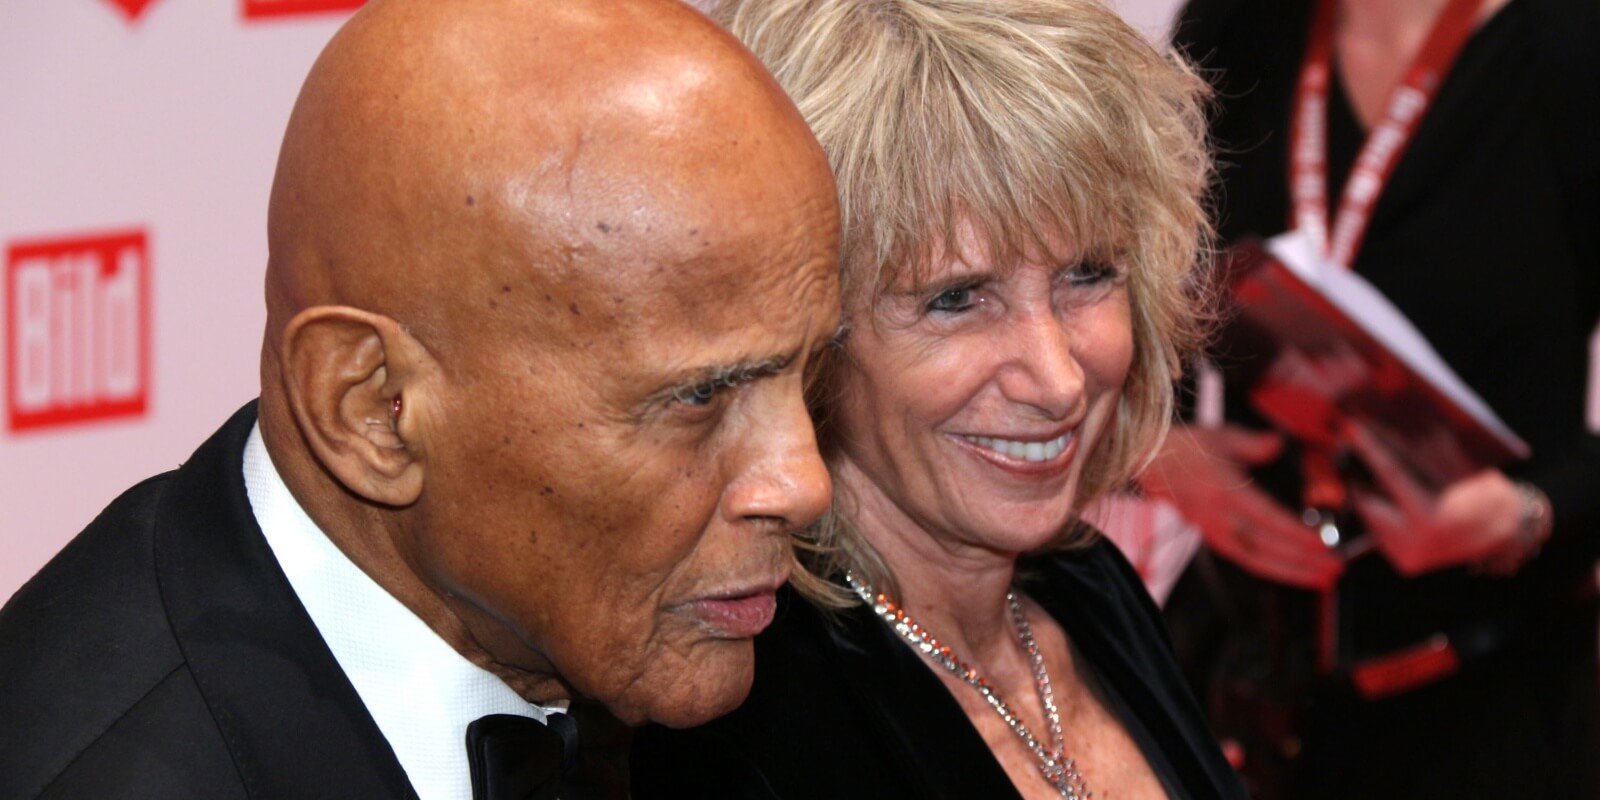 Harry Belafonte and his wife, Pamela Frank, in 2014.